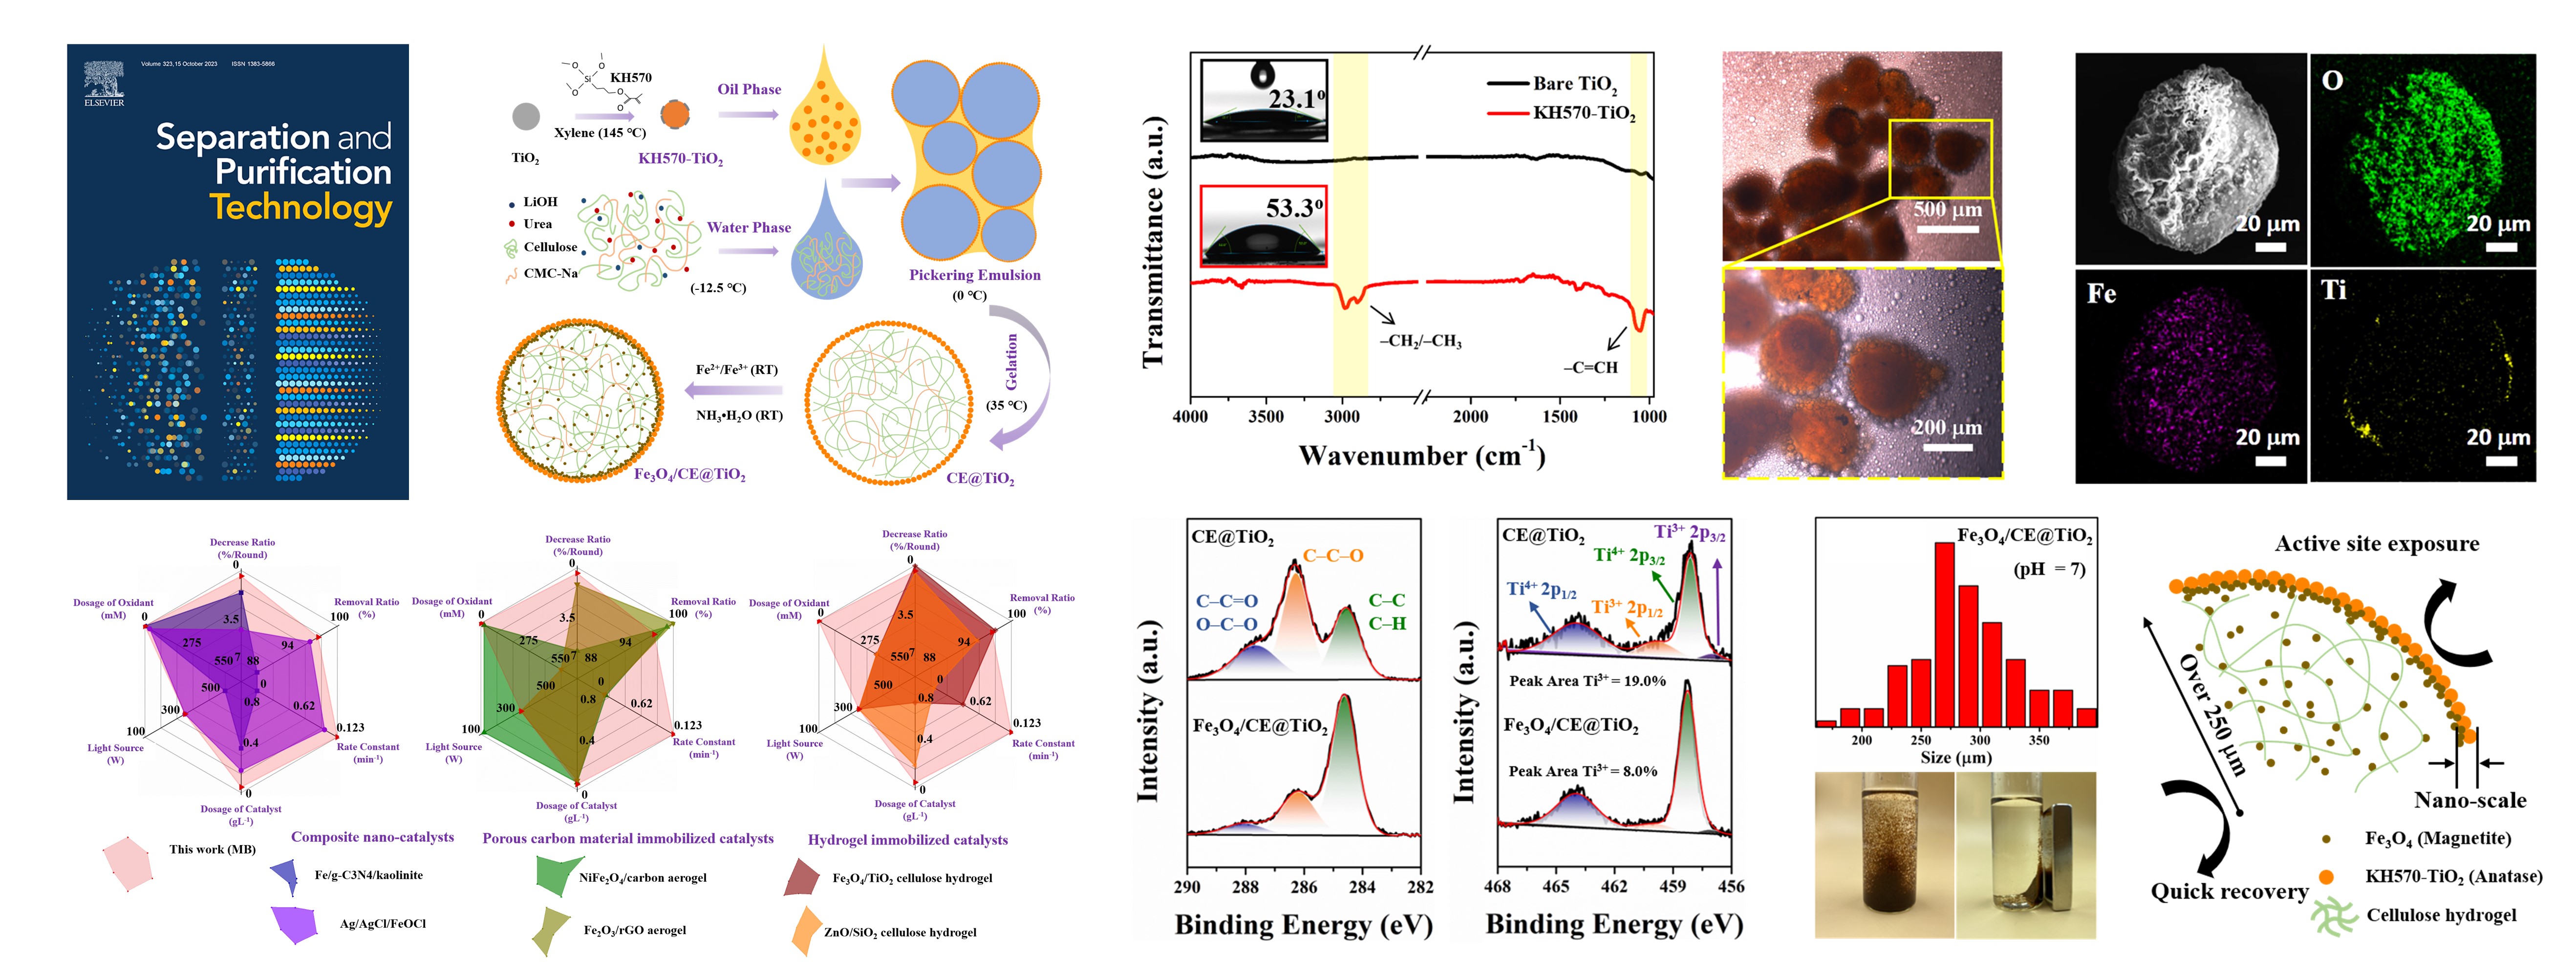 Structuring core-shell micro-reactor with binary complexes interface and selective passing surface towards enhancing photo-Fenton degradation.